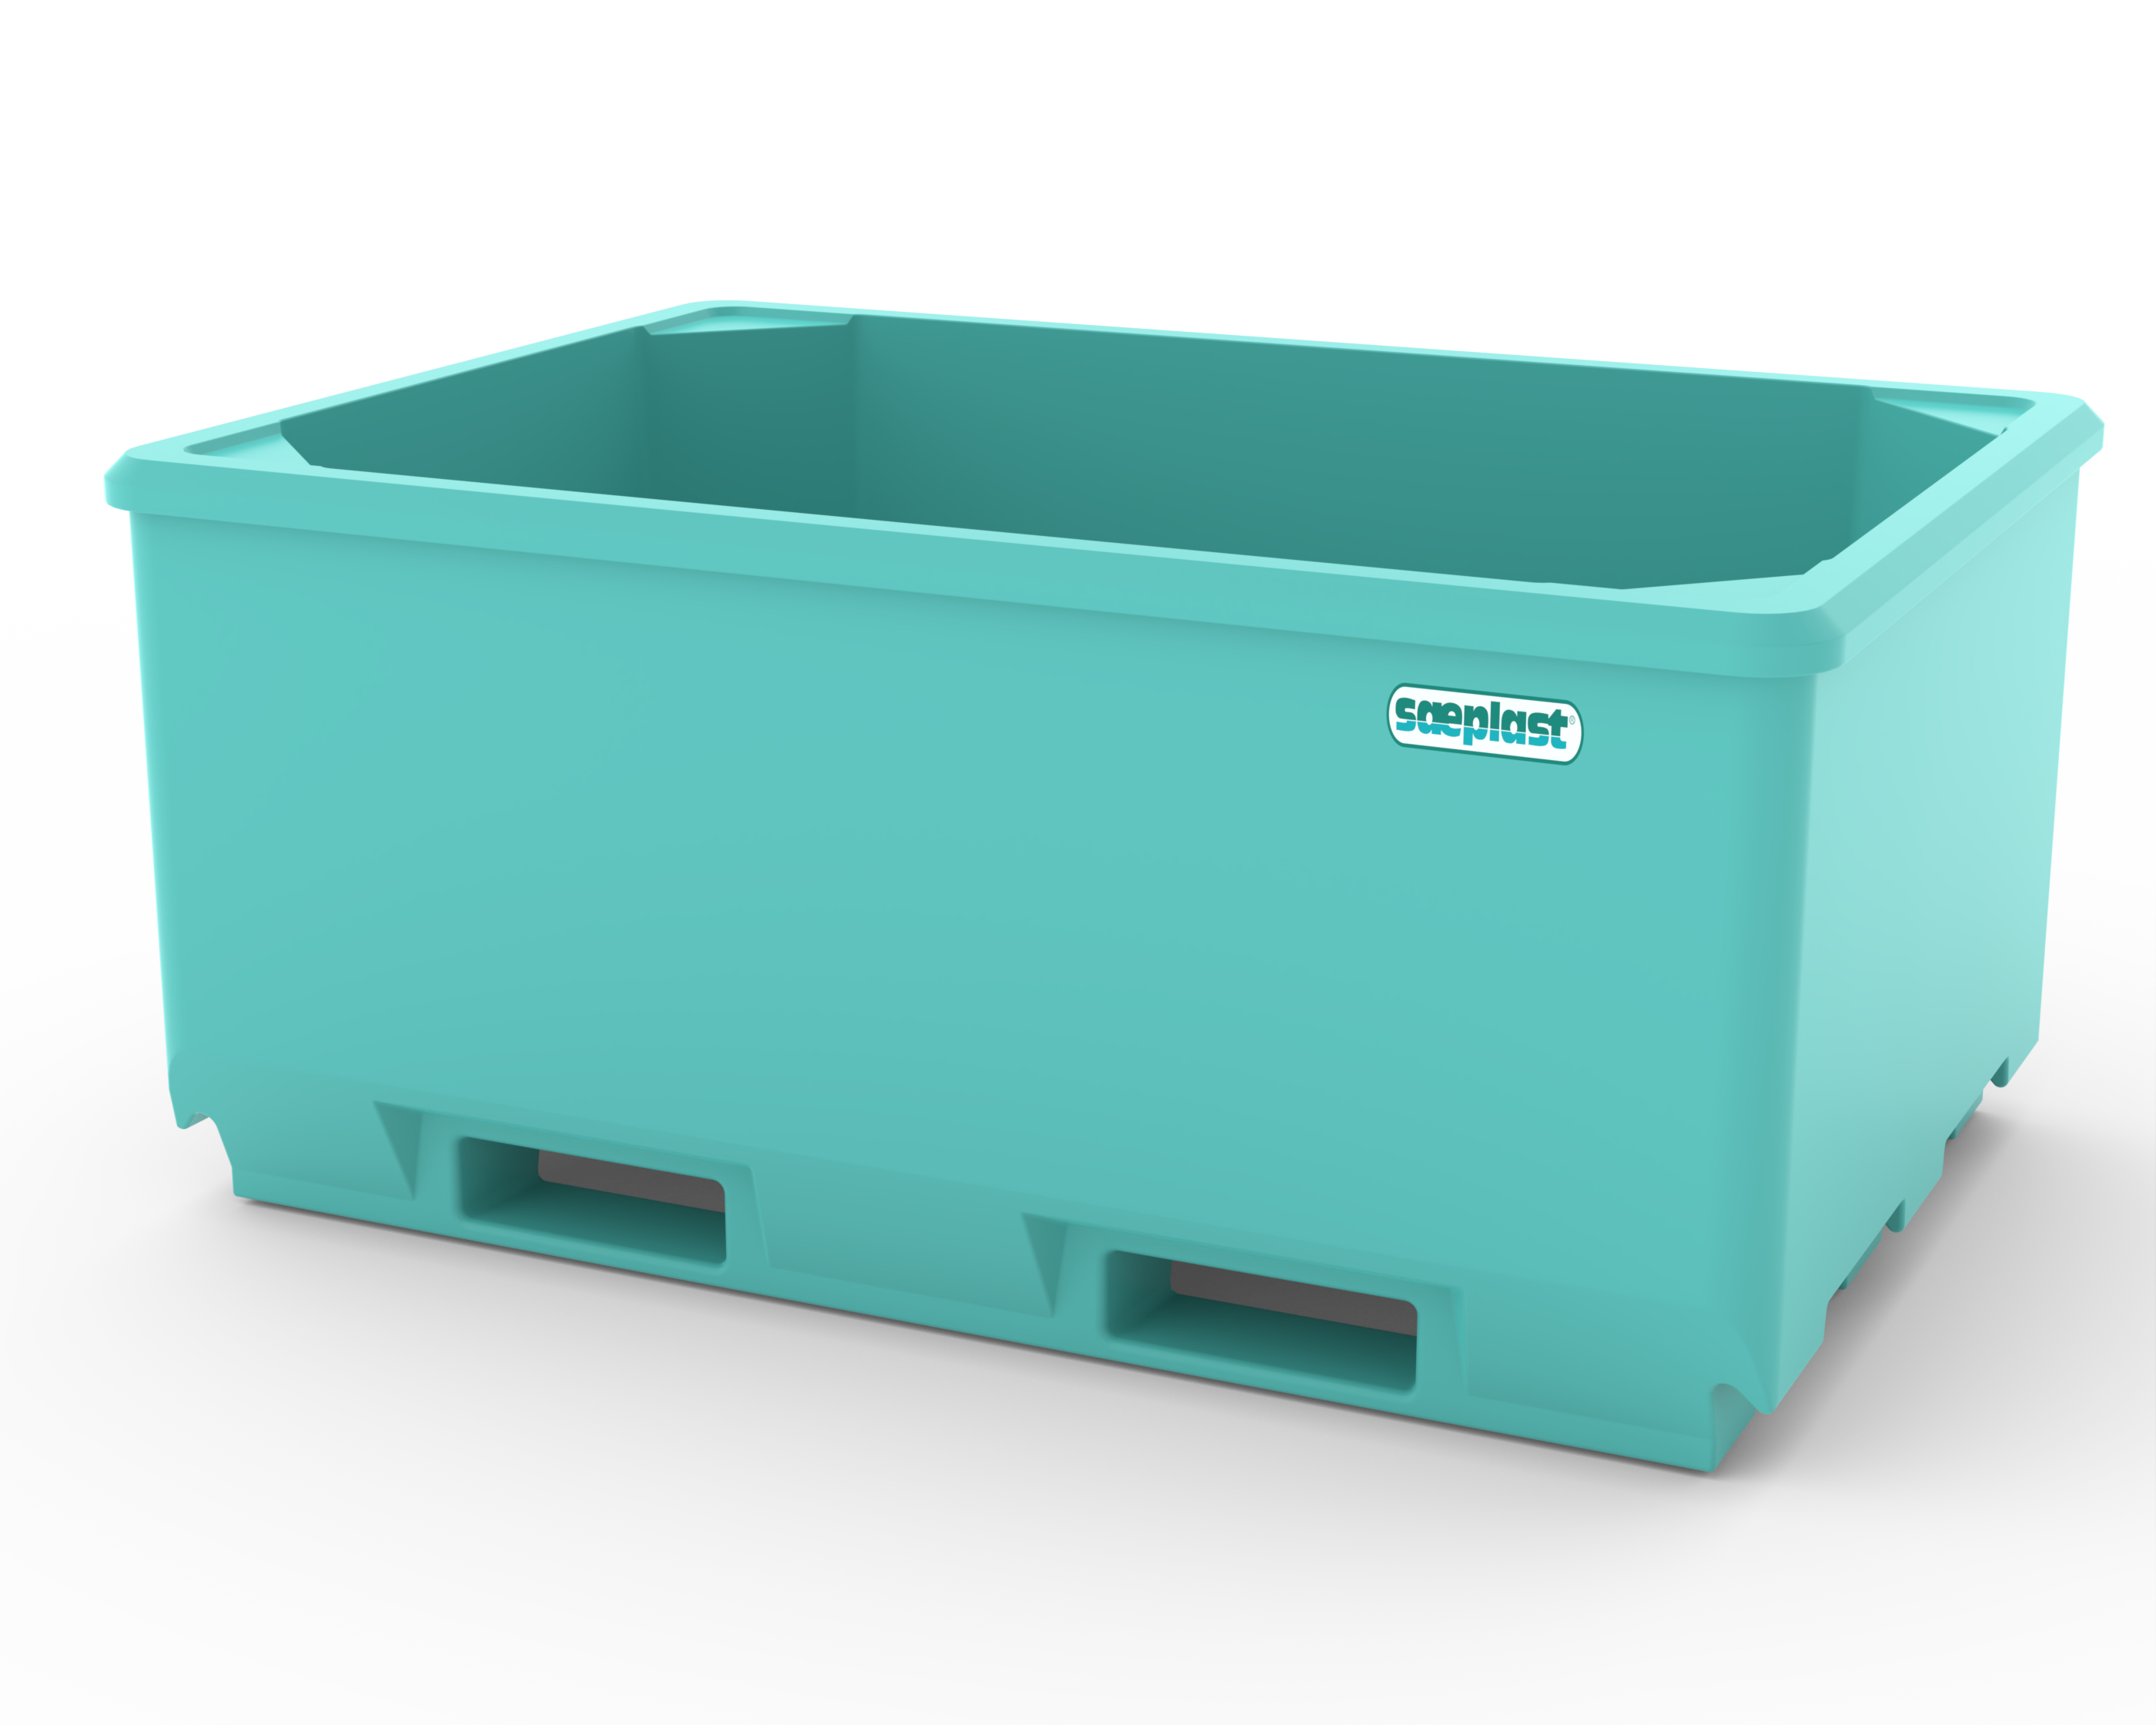 The Saeplast 700 Insulated Bulk Storage Container: Keep Your